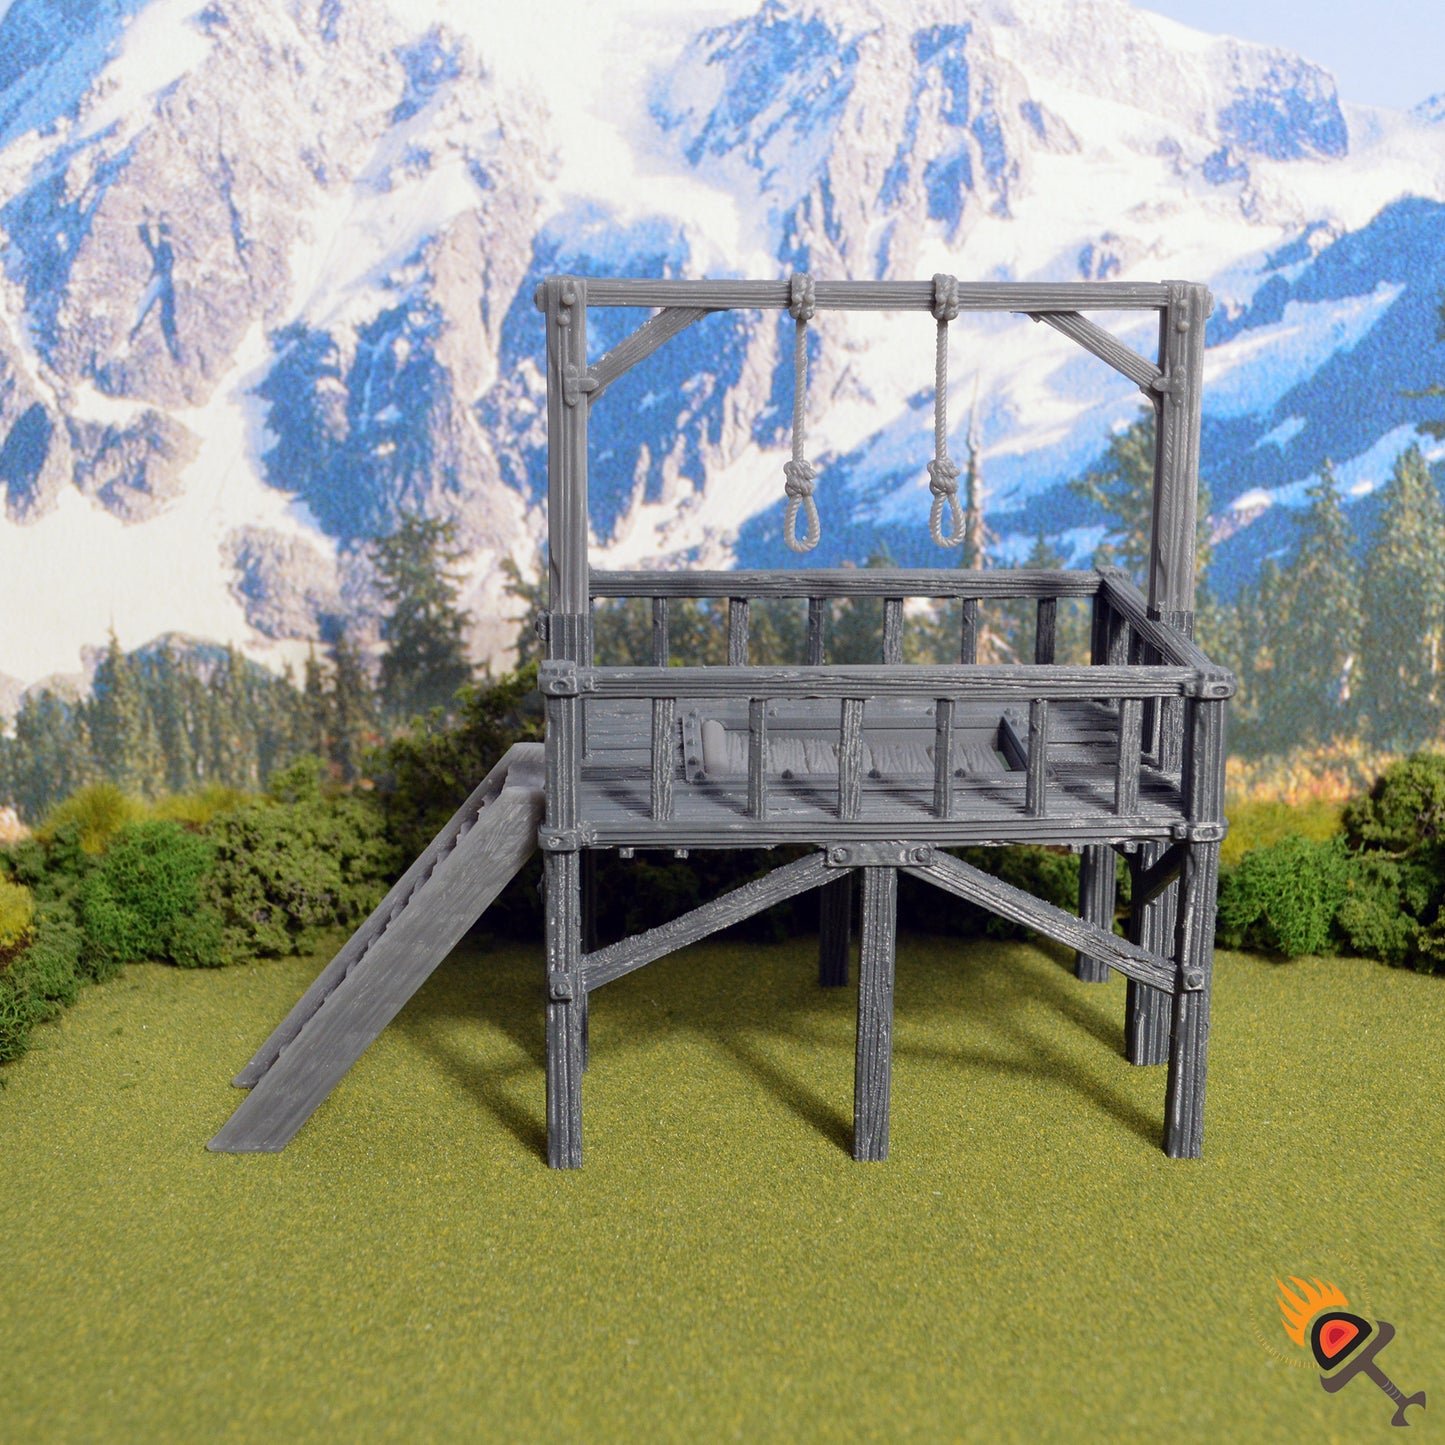 Miniature Gallows 15mm 28mm 32mm for D&D Terrain, Medieval Gallows for DnD Pathfinder and Tabletop Games